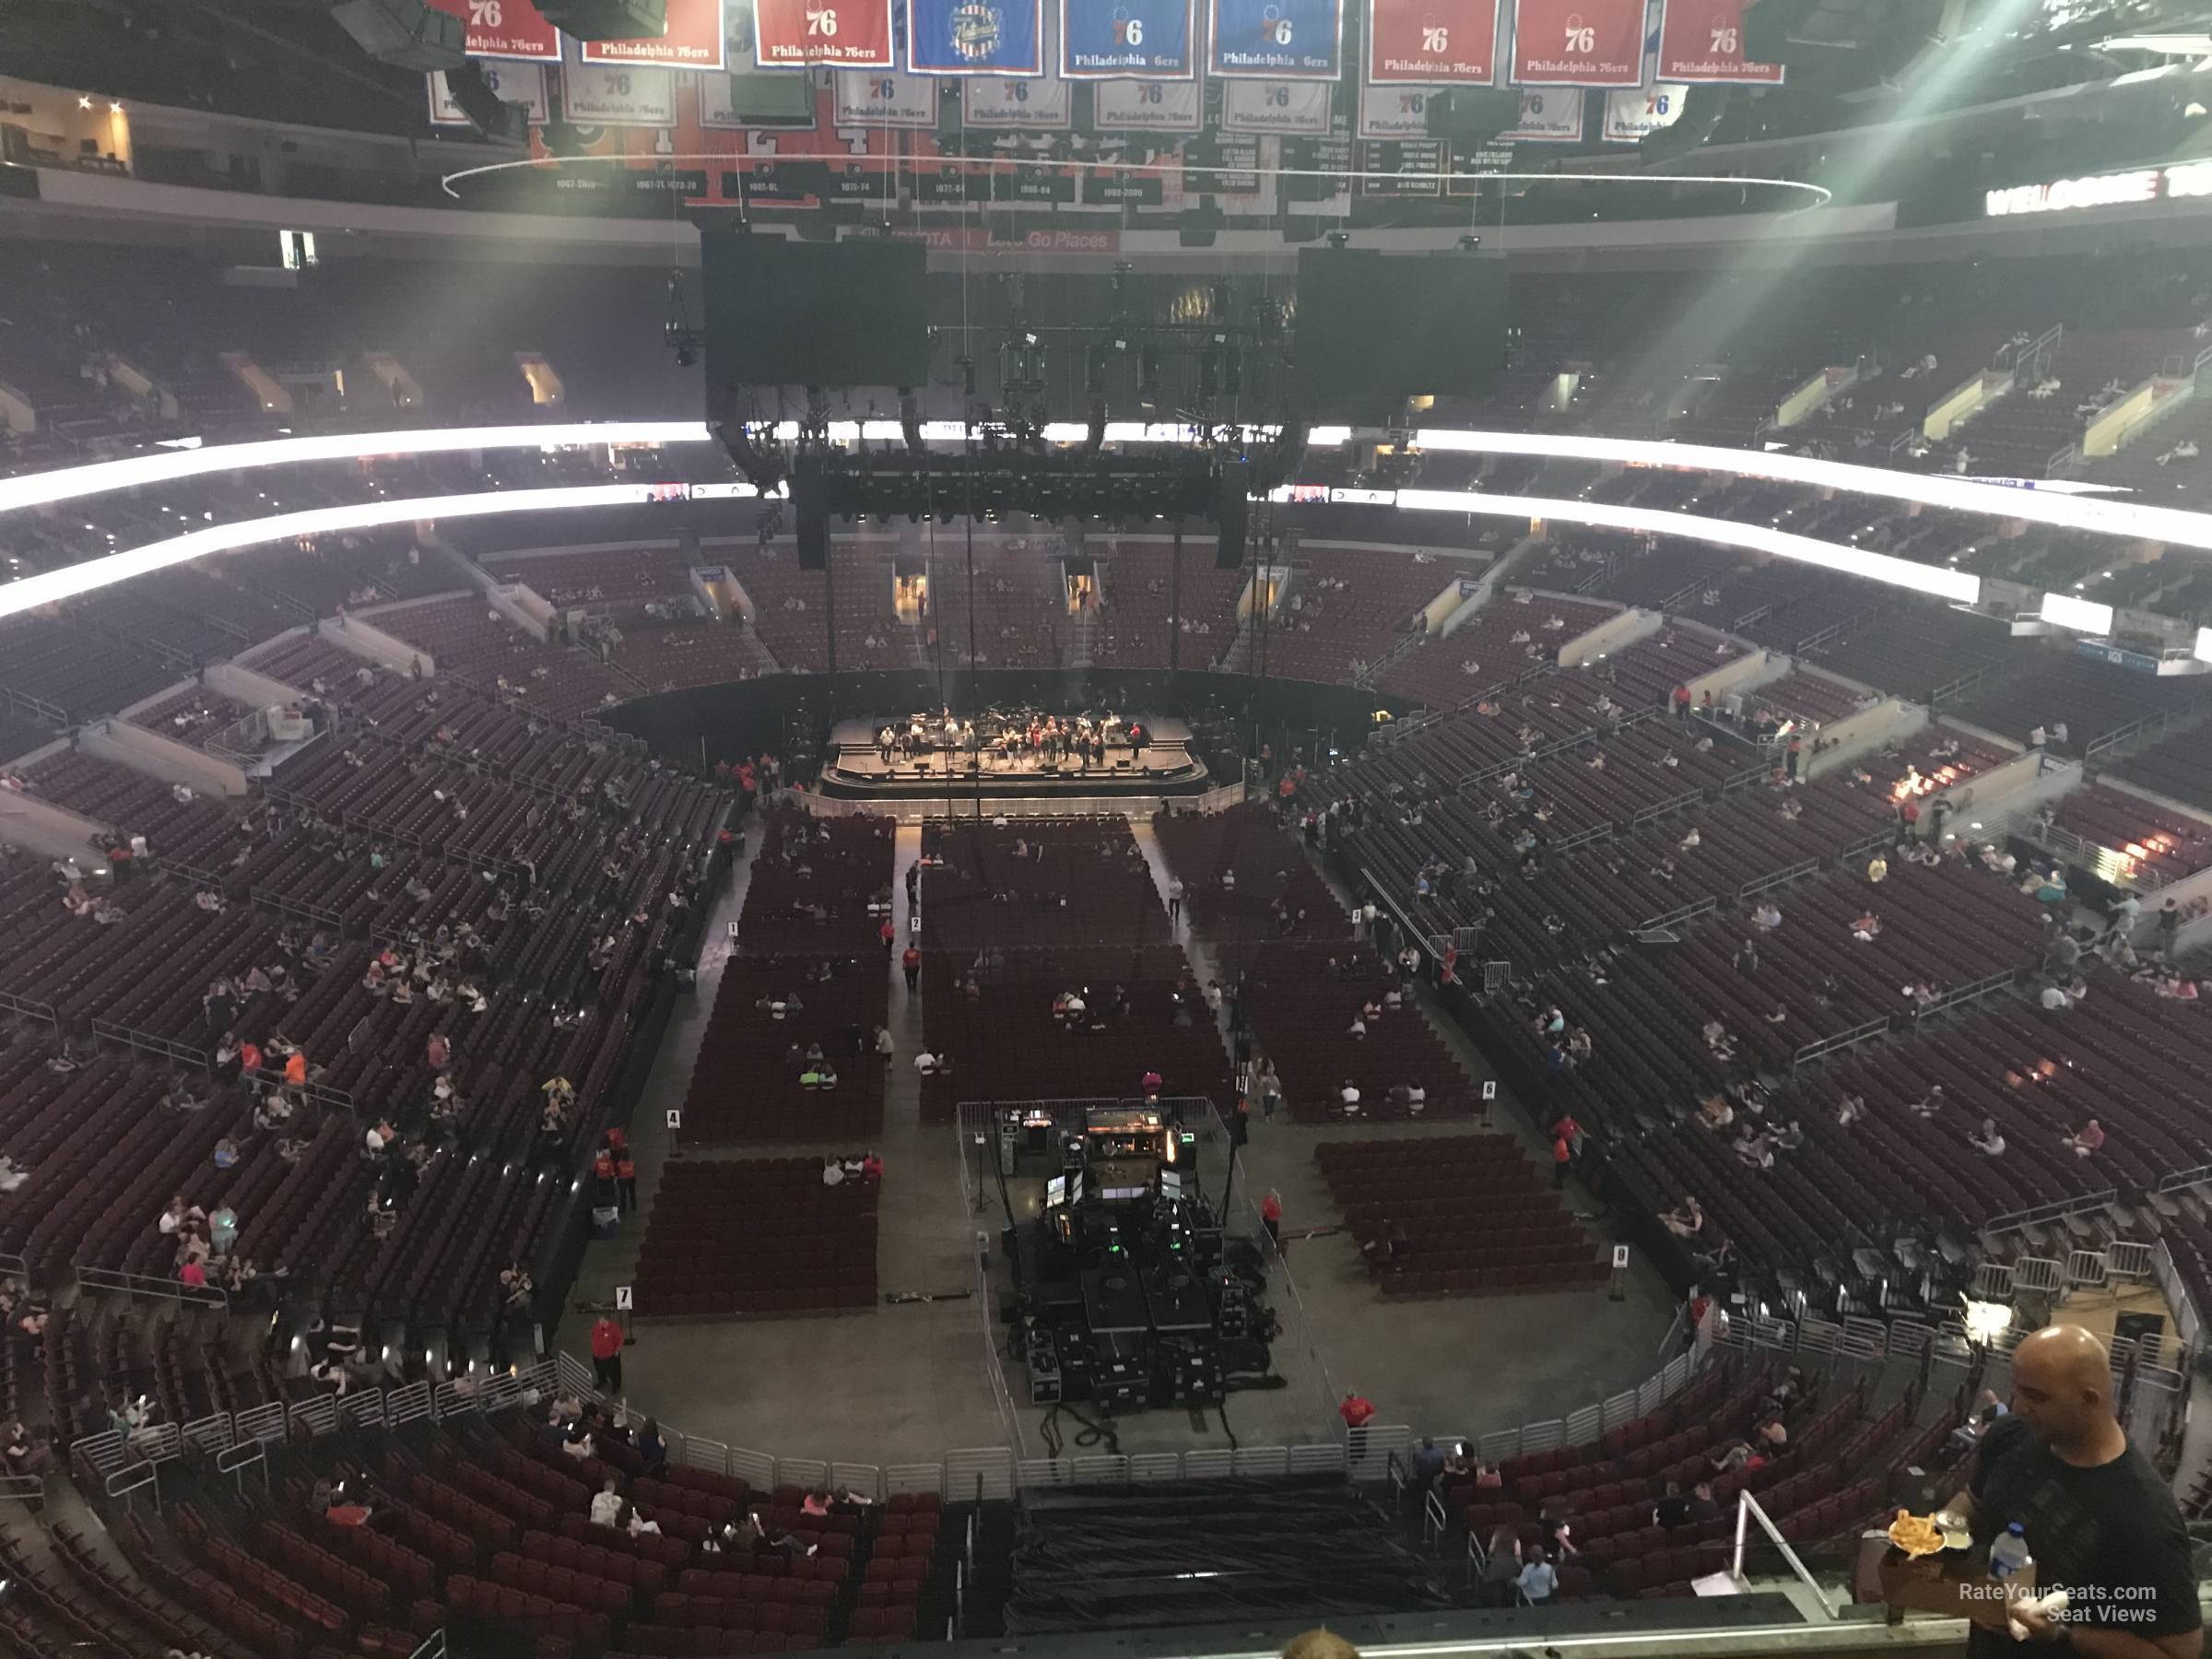 section 207, row 7 seat view  for concert - wells fargo center